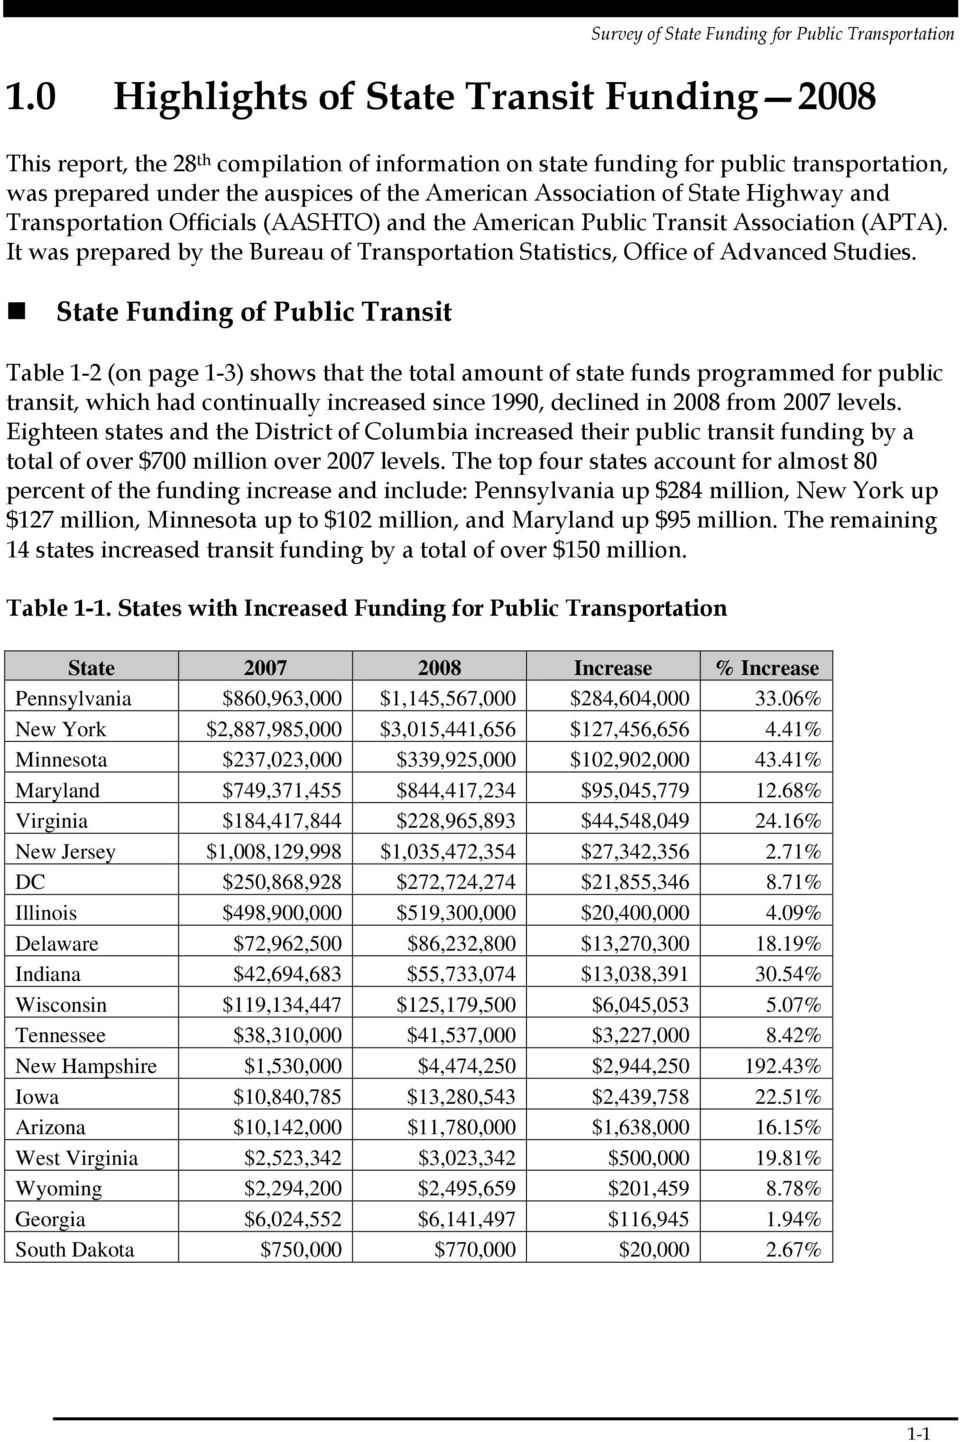 State Funding of Public Transit Table 1-2 (on page 1-3) shows that the total amount of state funds programmed for public transit, which had continually increased since 1990, declined in 2008 from